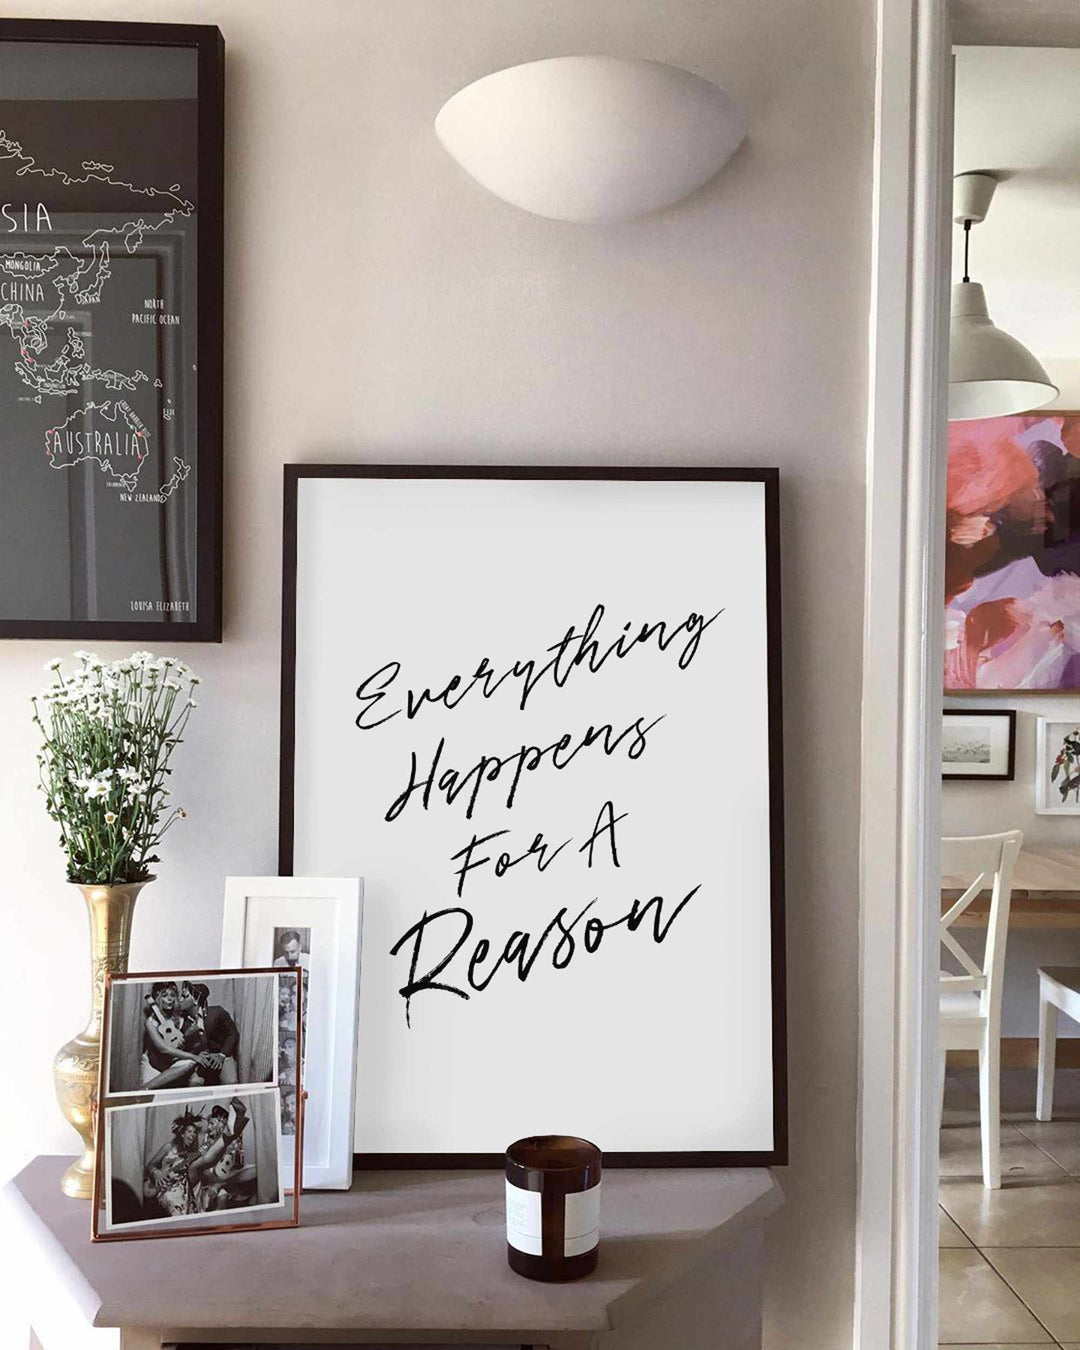 Typographic Wall Art Print 'Everything Happens For A Reason'